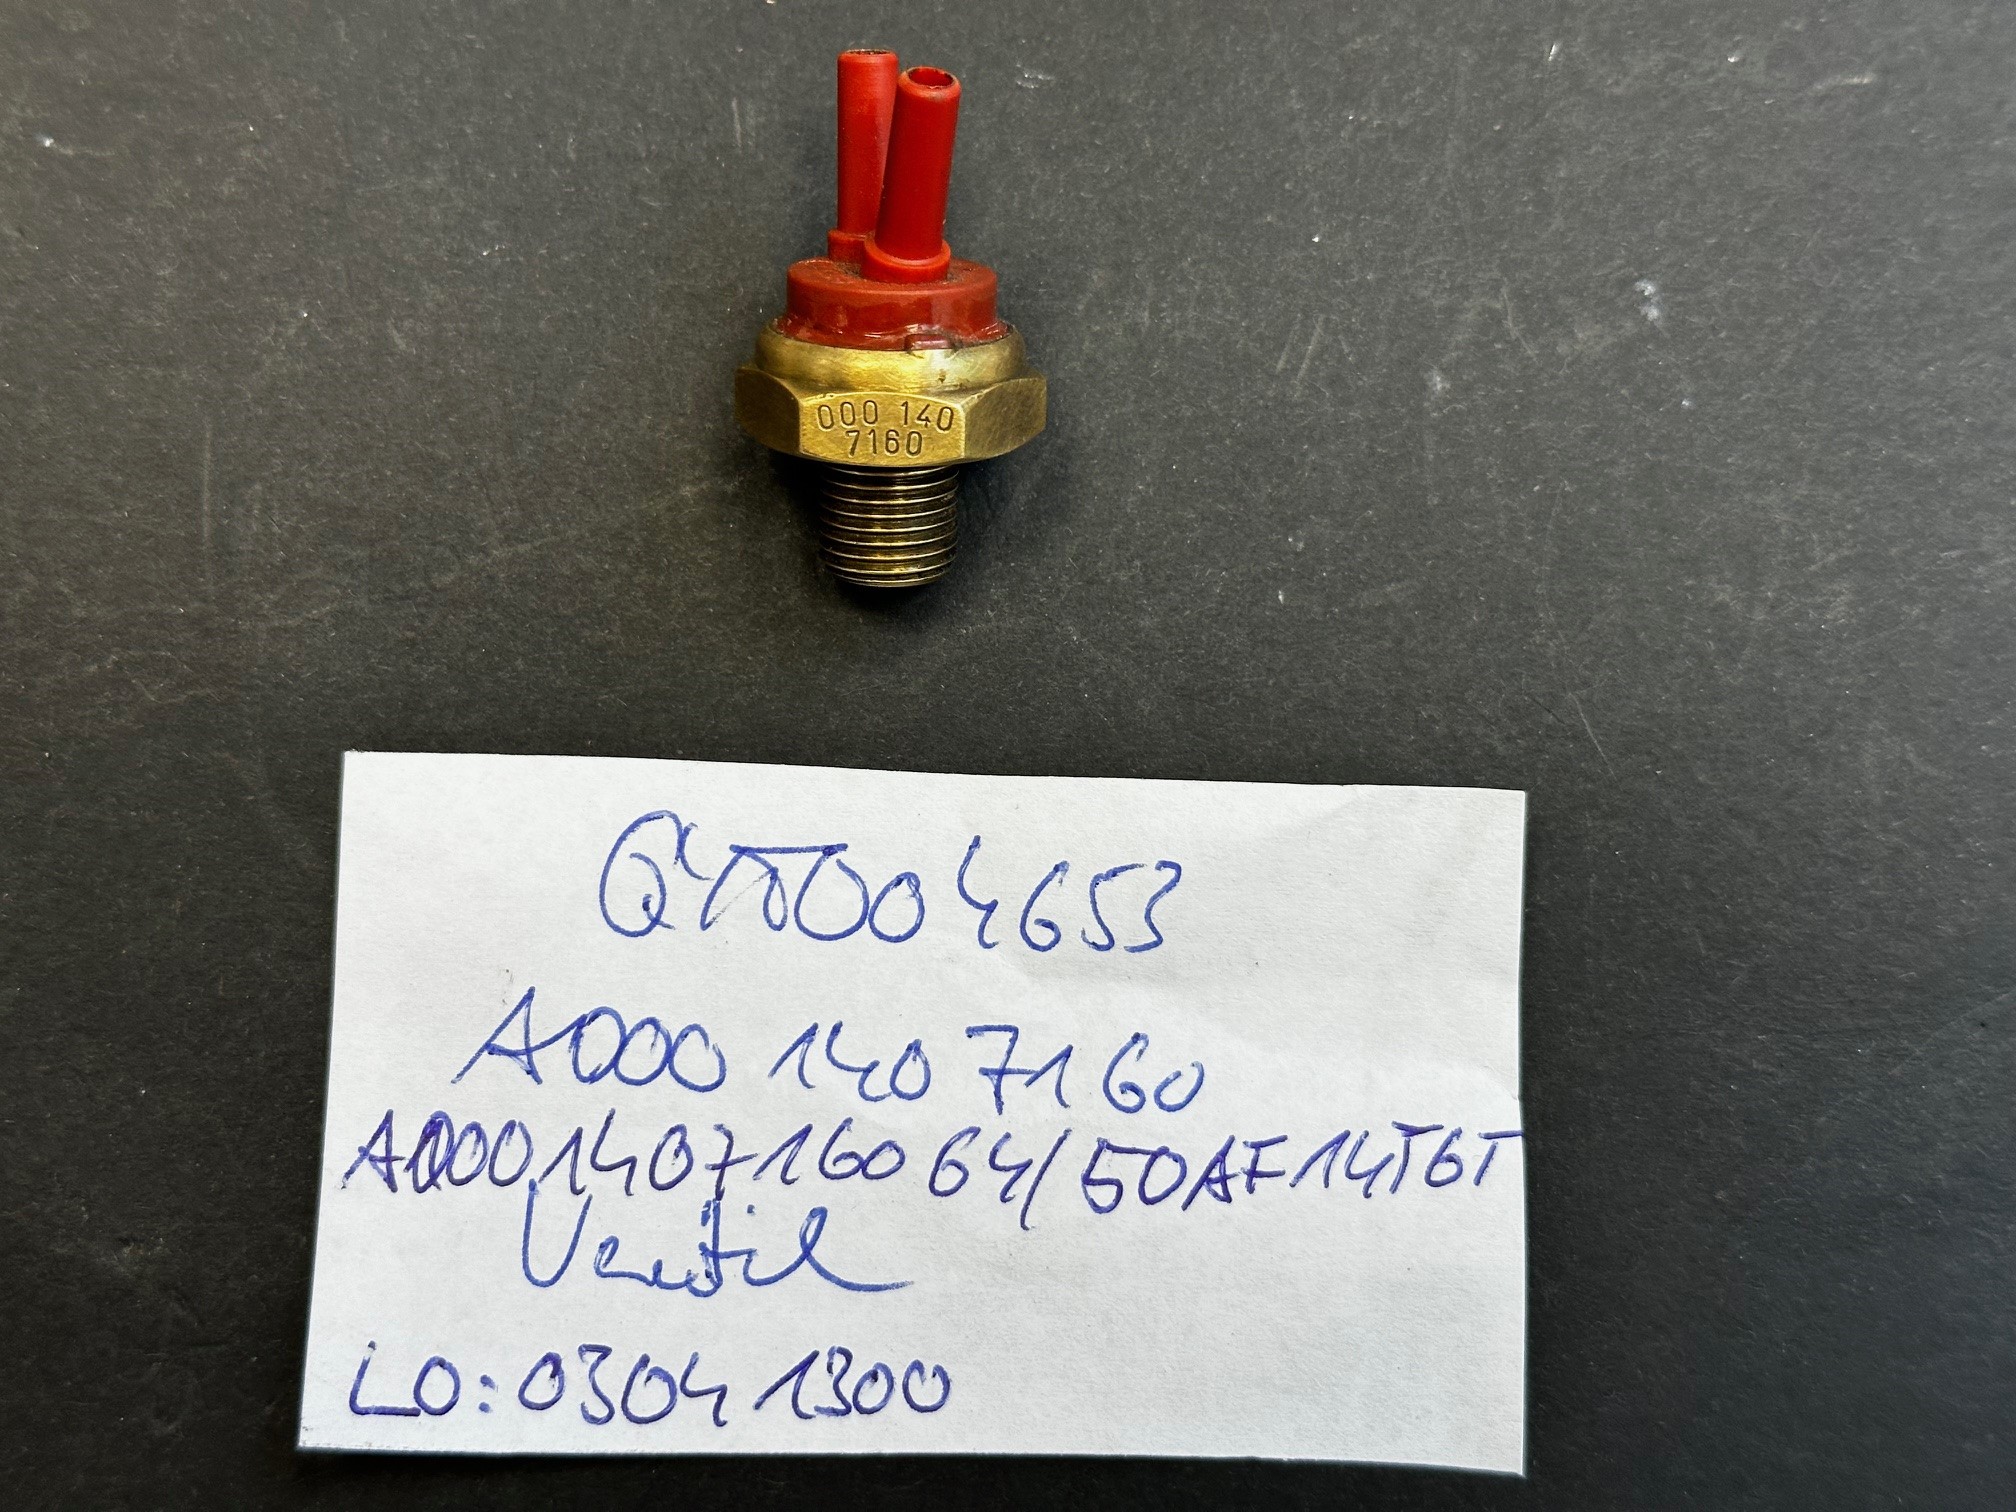 Thermoventil 50°C Thermosteuerung AGR-Ventil rot A0001407160 A0001407160 64 A0001407260 50AF14T6T